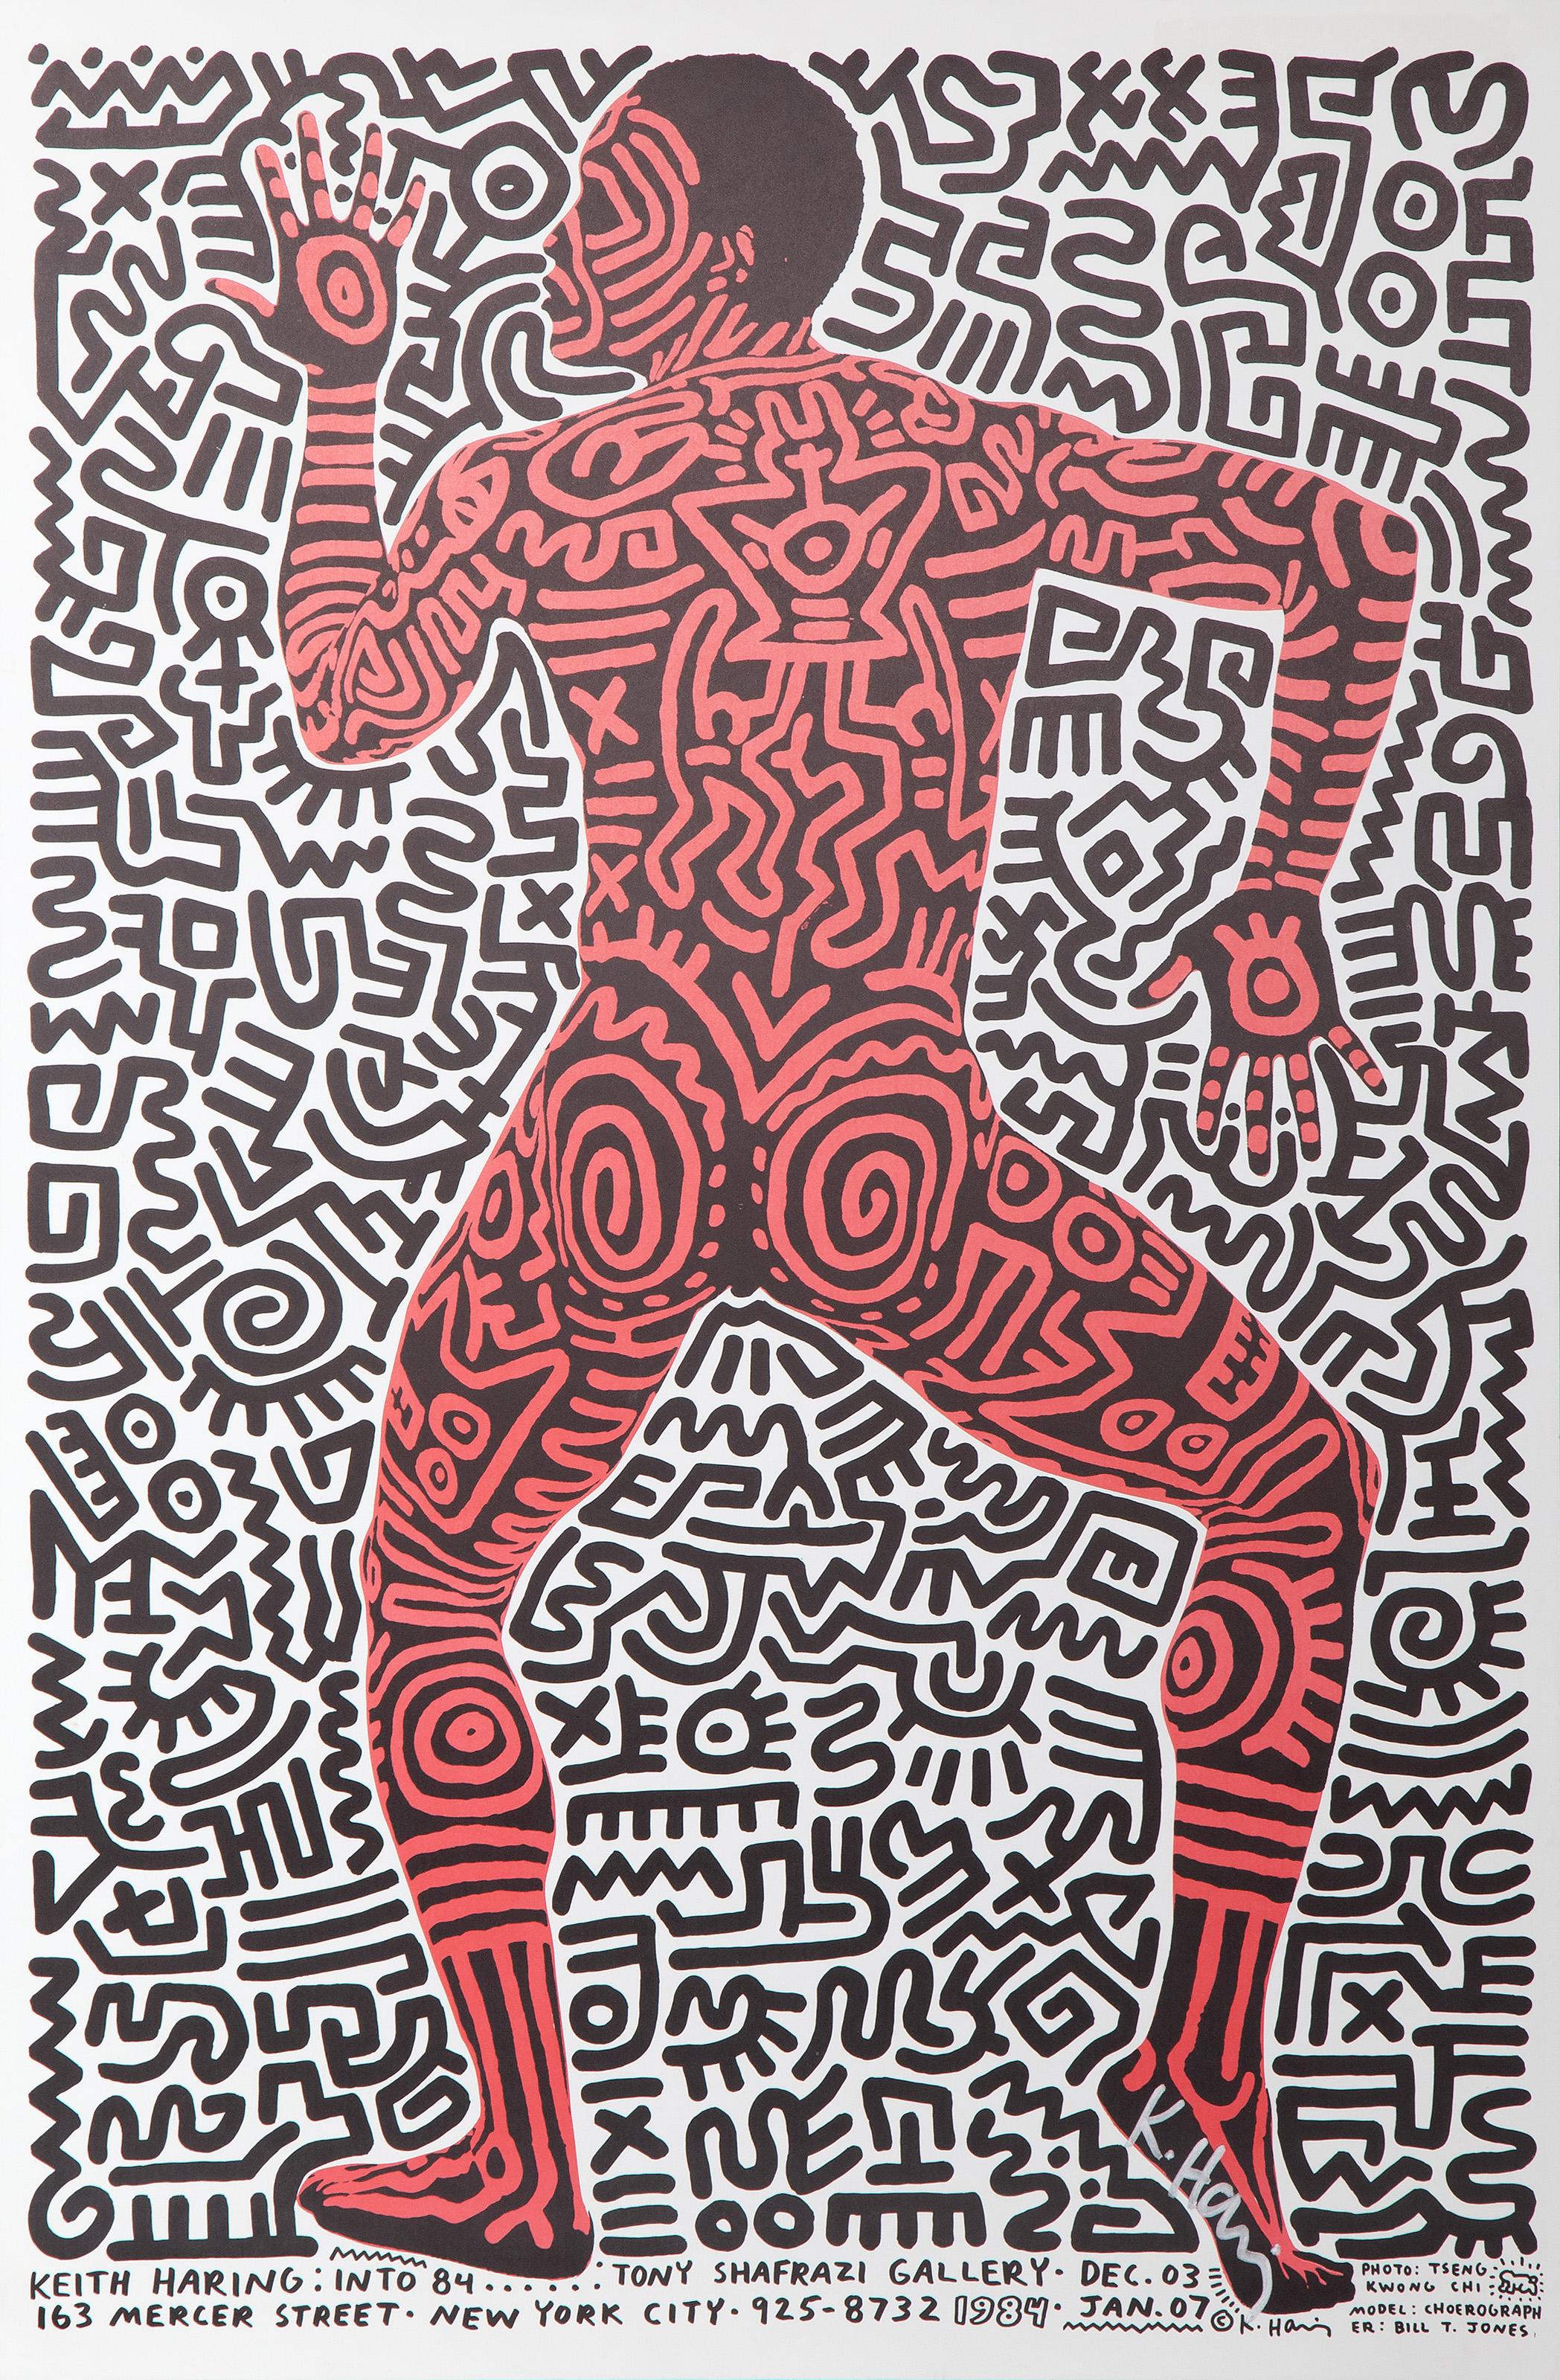 This poster was made to advertise American Pop artist Keith Haring’s exhibition at Tony Shafrazi Gallery in 1984. The composition features a nude figure in the center with their back to the view and both the figure and the background they are